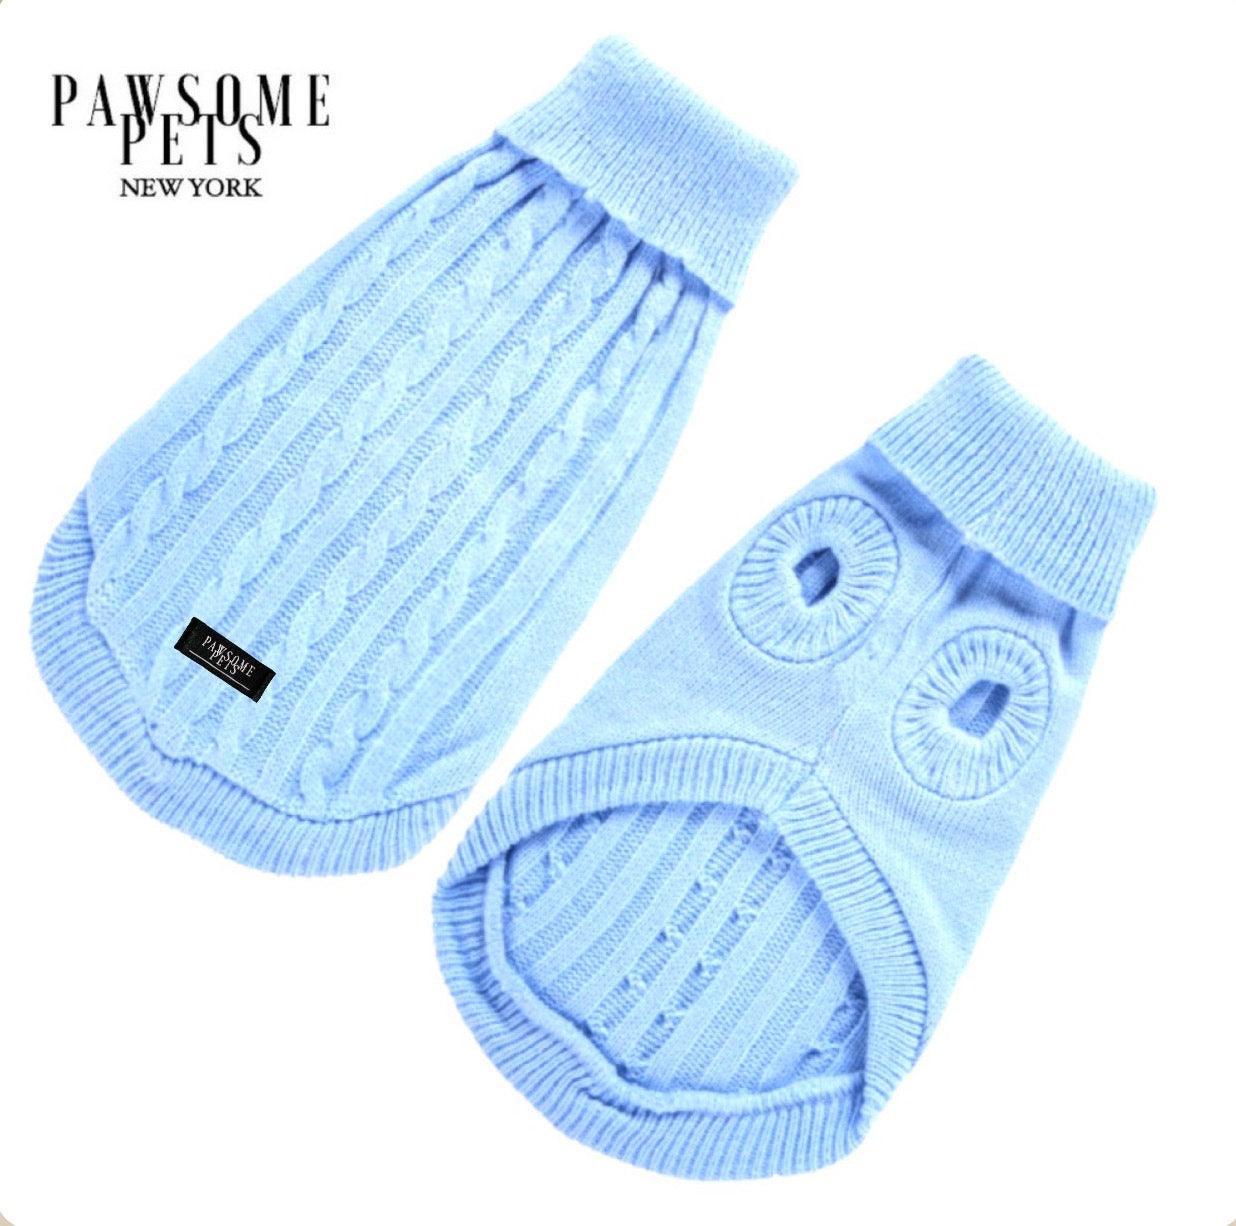 DOG AND CAT CABLE KNIT SWEATER - LIGHT BLUE